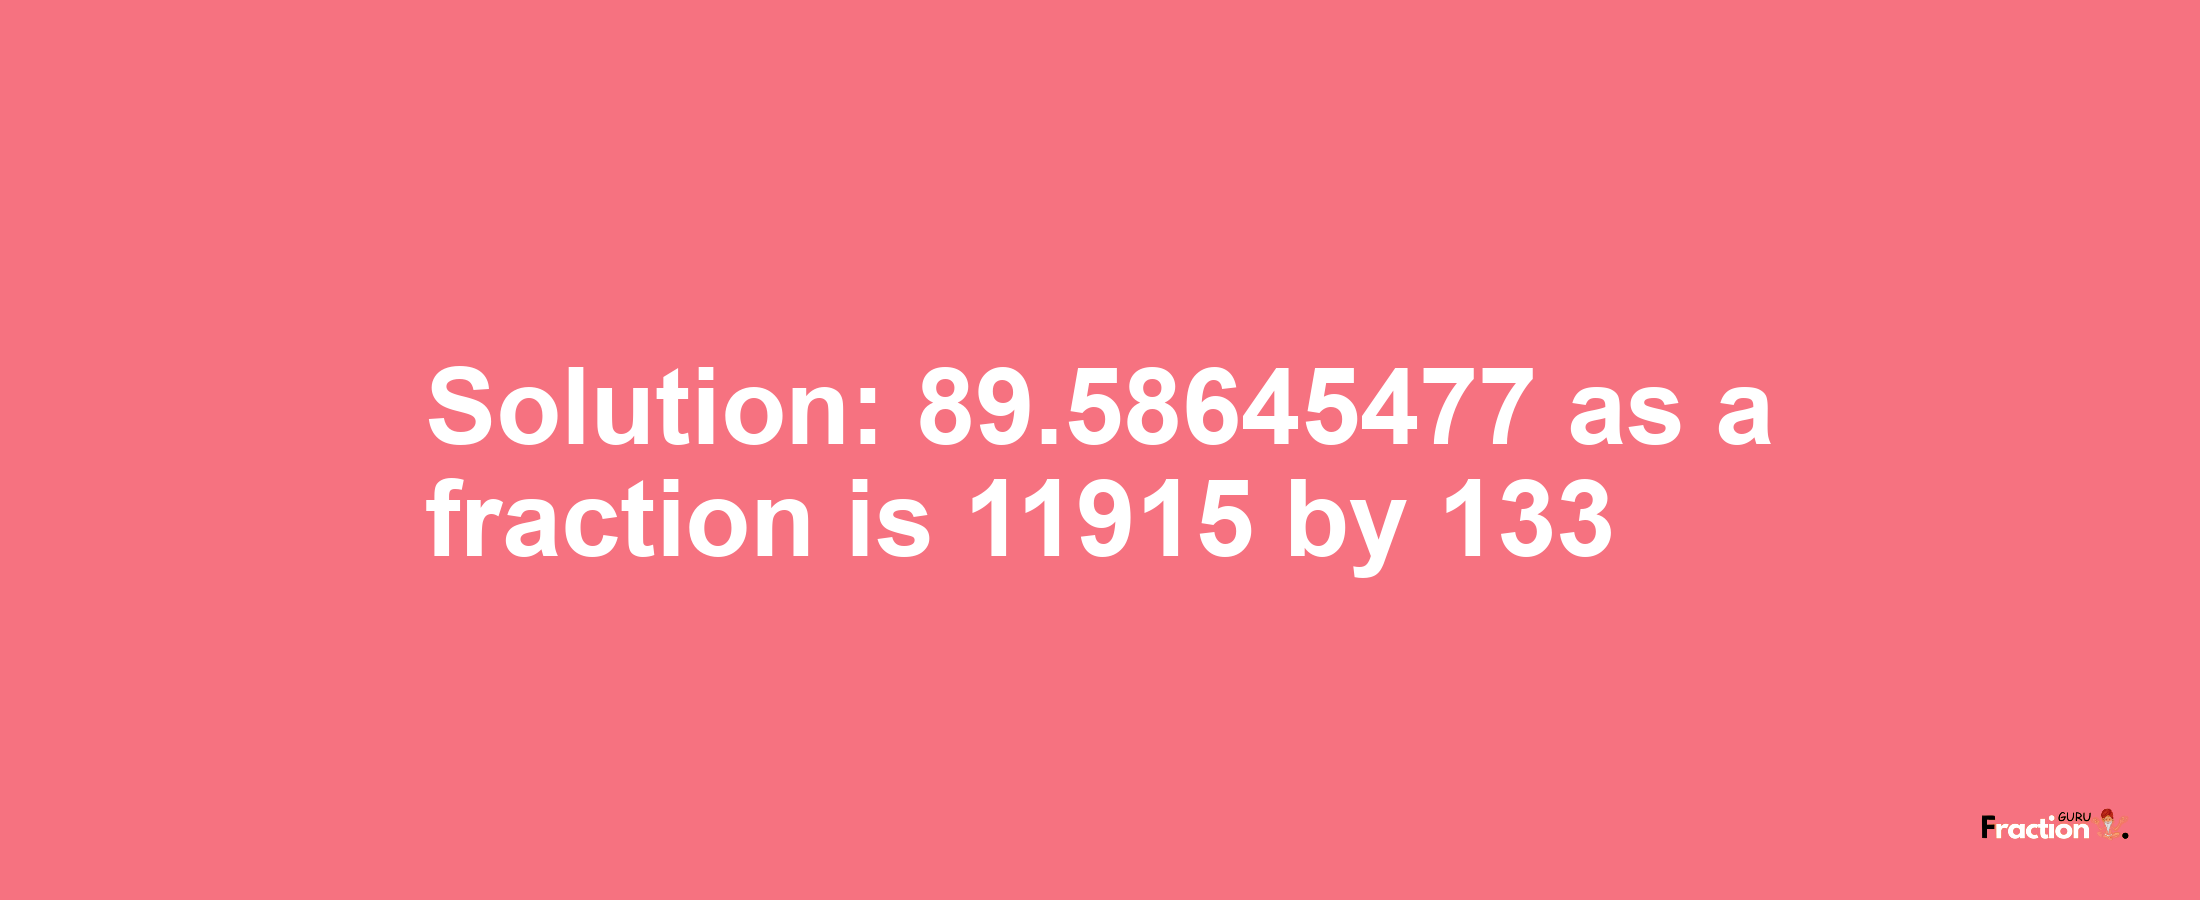 Solution:89.58645477 as a fraction is 11915/133